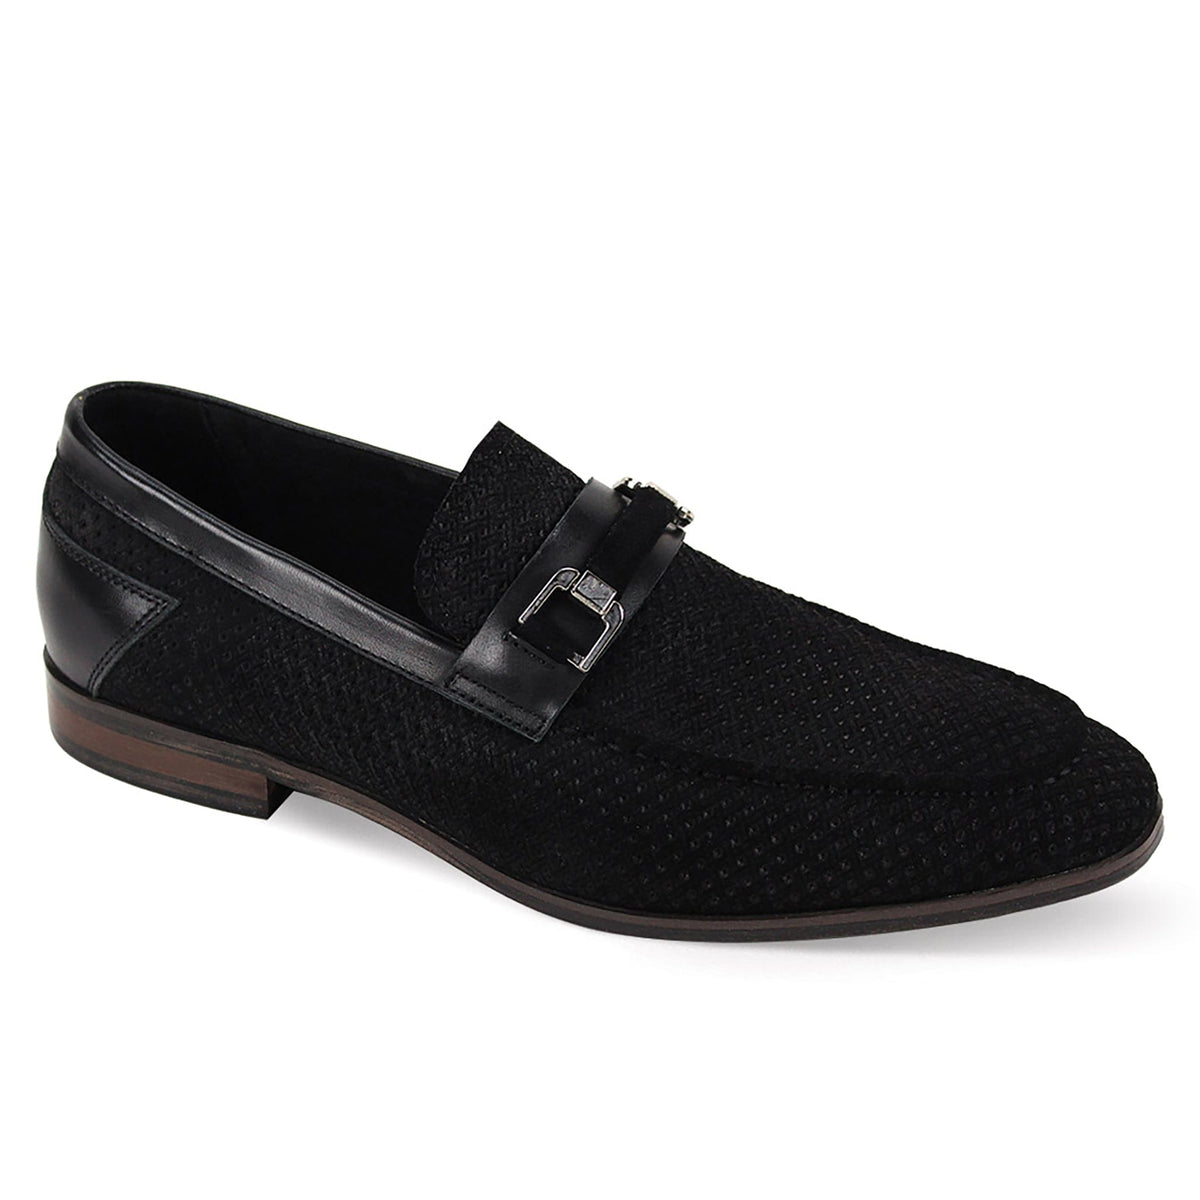 GIOVANNI LEATHER SHOES FT BLACK / 7 GIOVANNI LEATHER SHOES-ROMAN